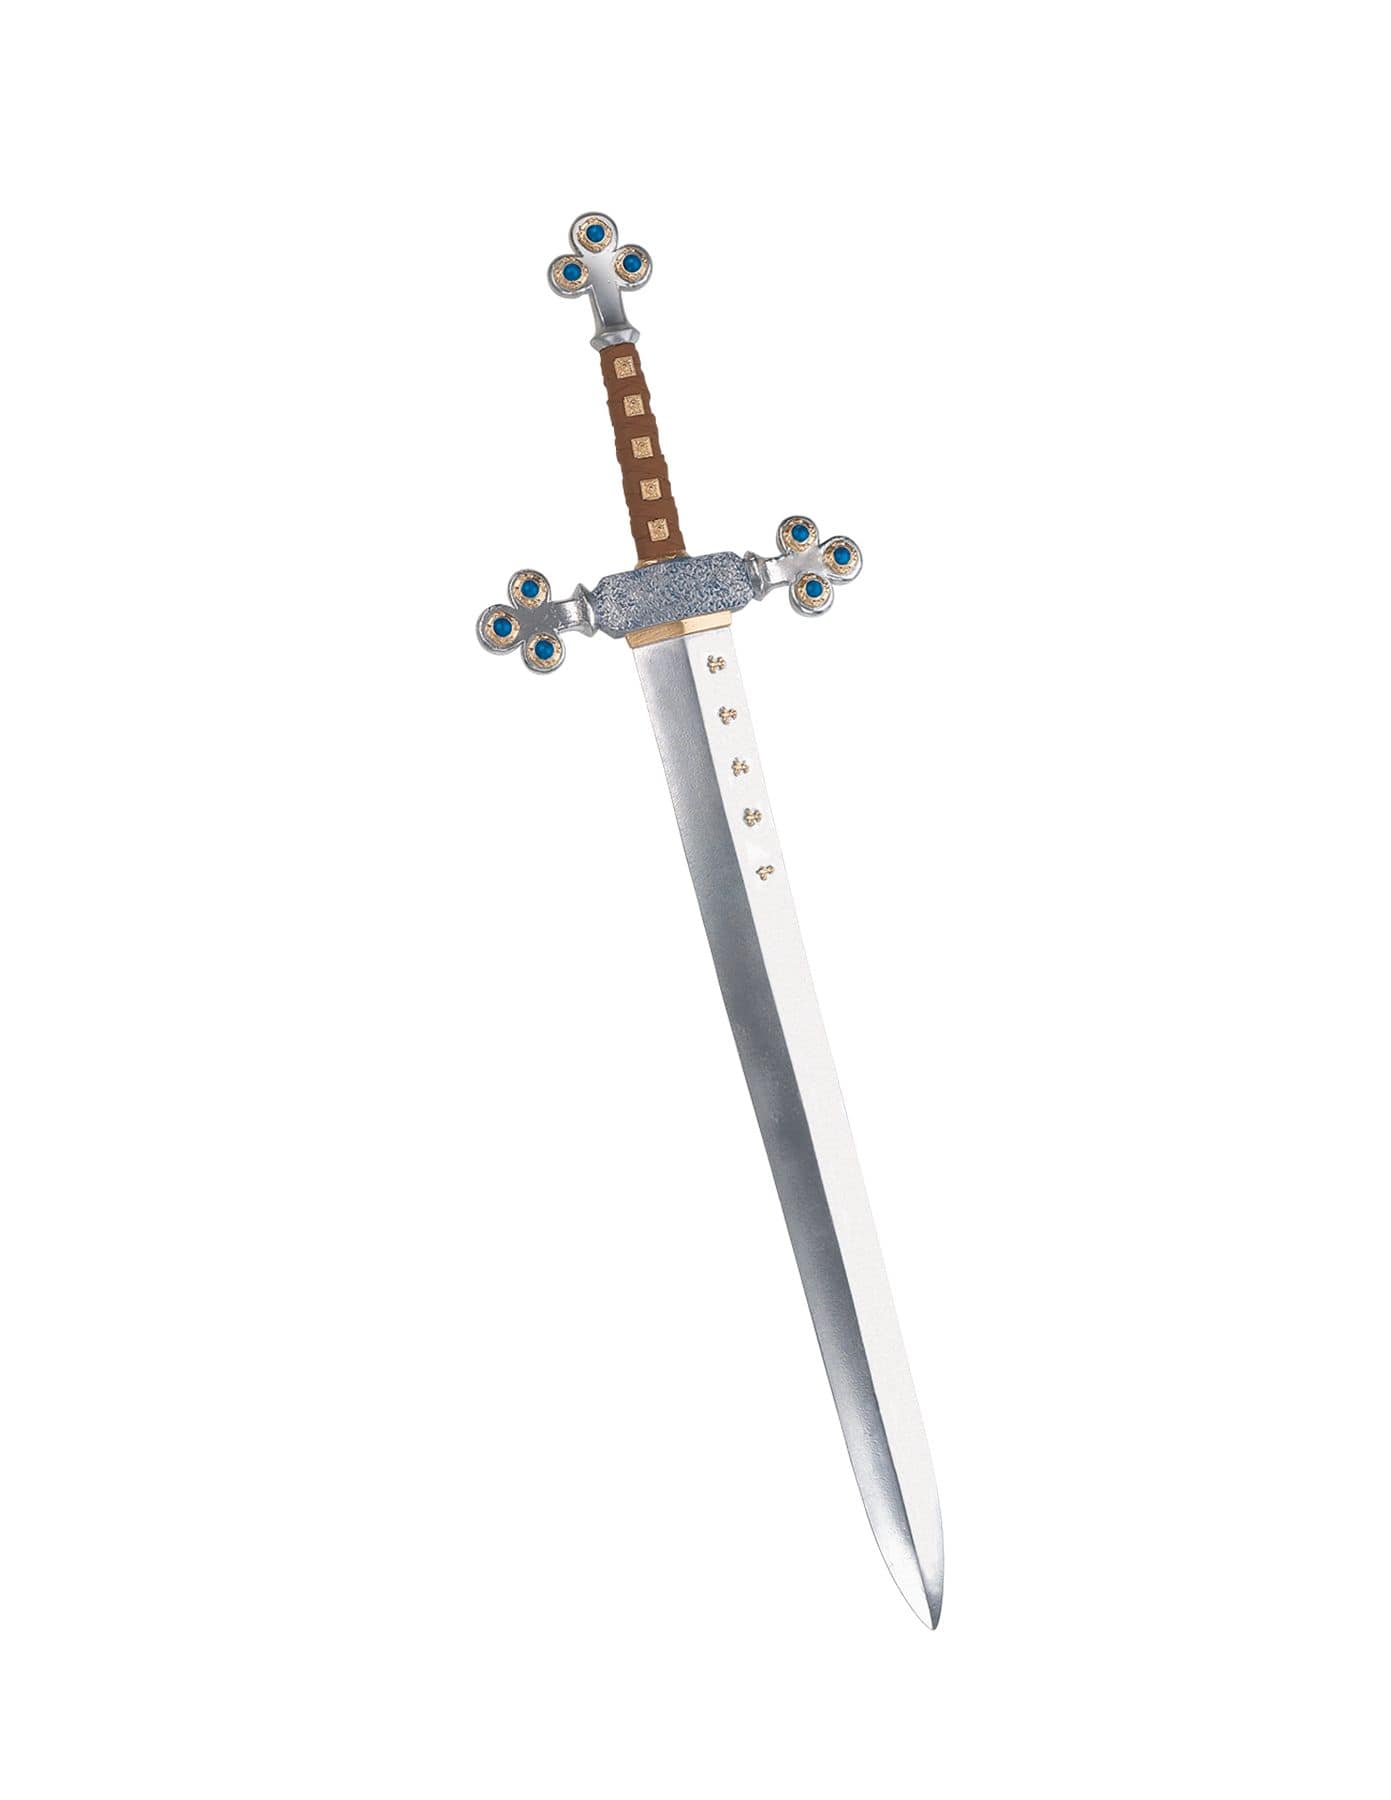 Medieval Sword Weapon, Silver, 35-in, Wearable Costume Prop for Halloween